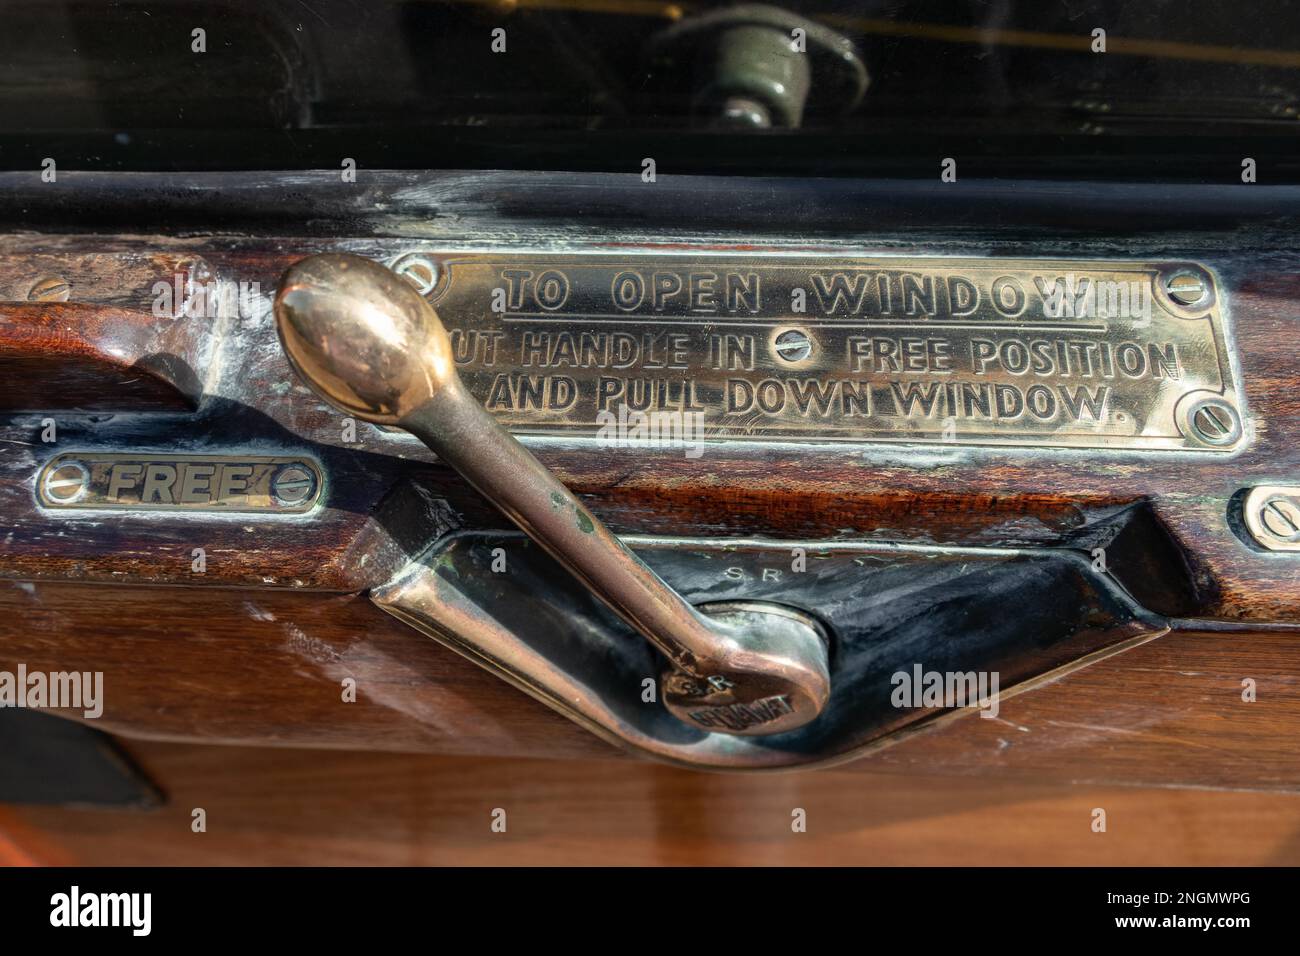 EAST GRINSTEAD, WEST SUSSEX/UK - AUGUST 30 : Window lever on a steam train in East Grinstead station West Sussex on August 30, 2019 Stock Photo